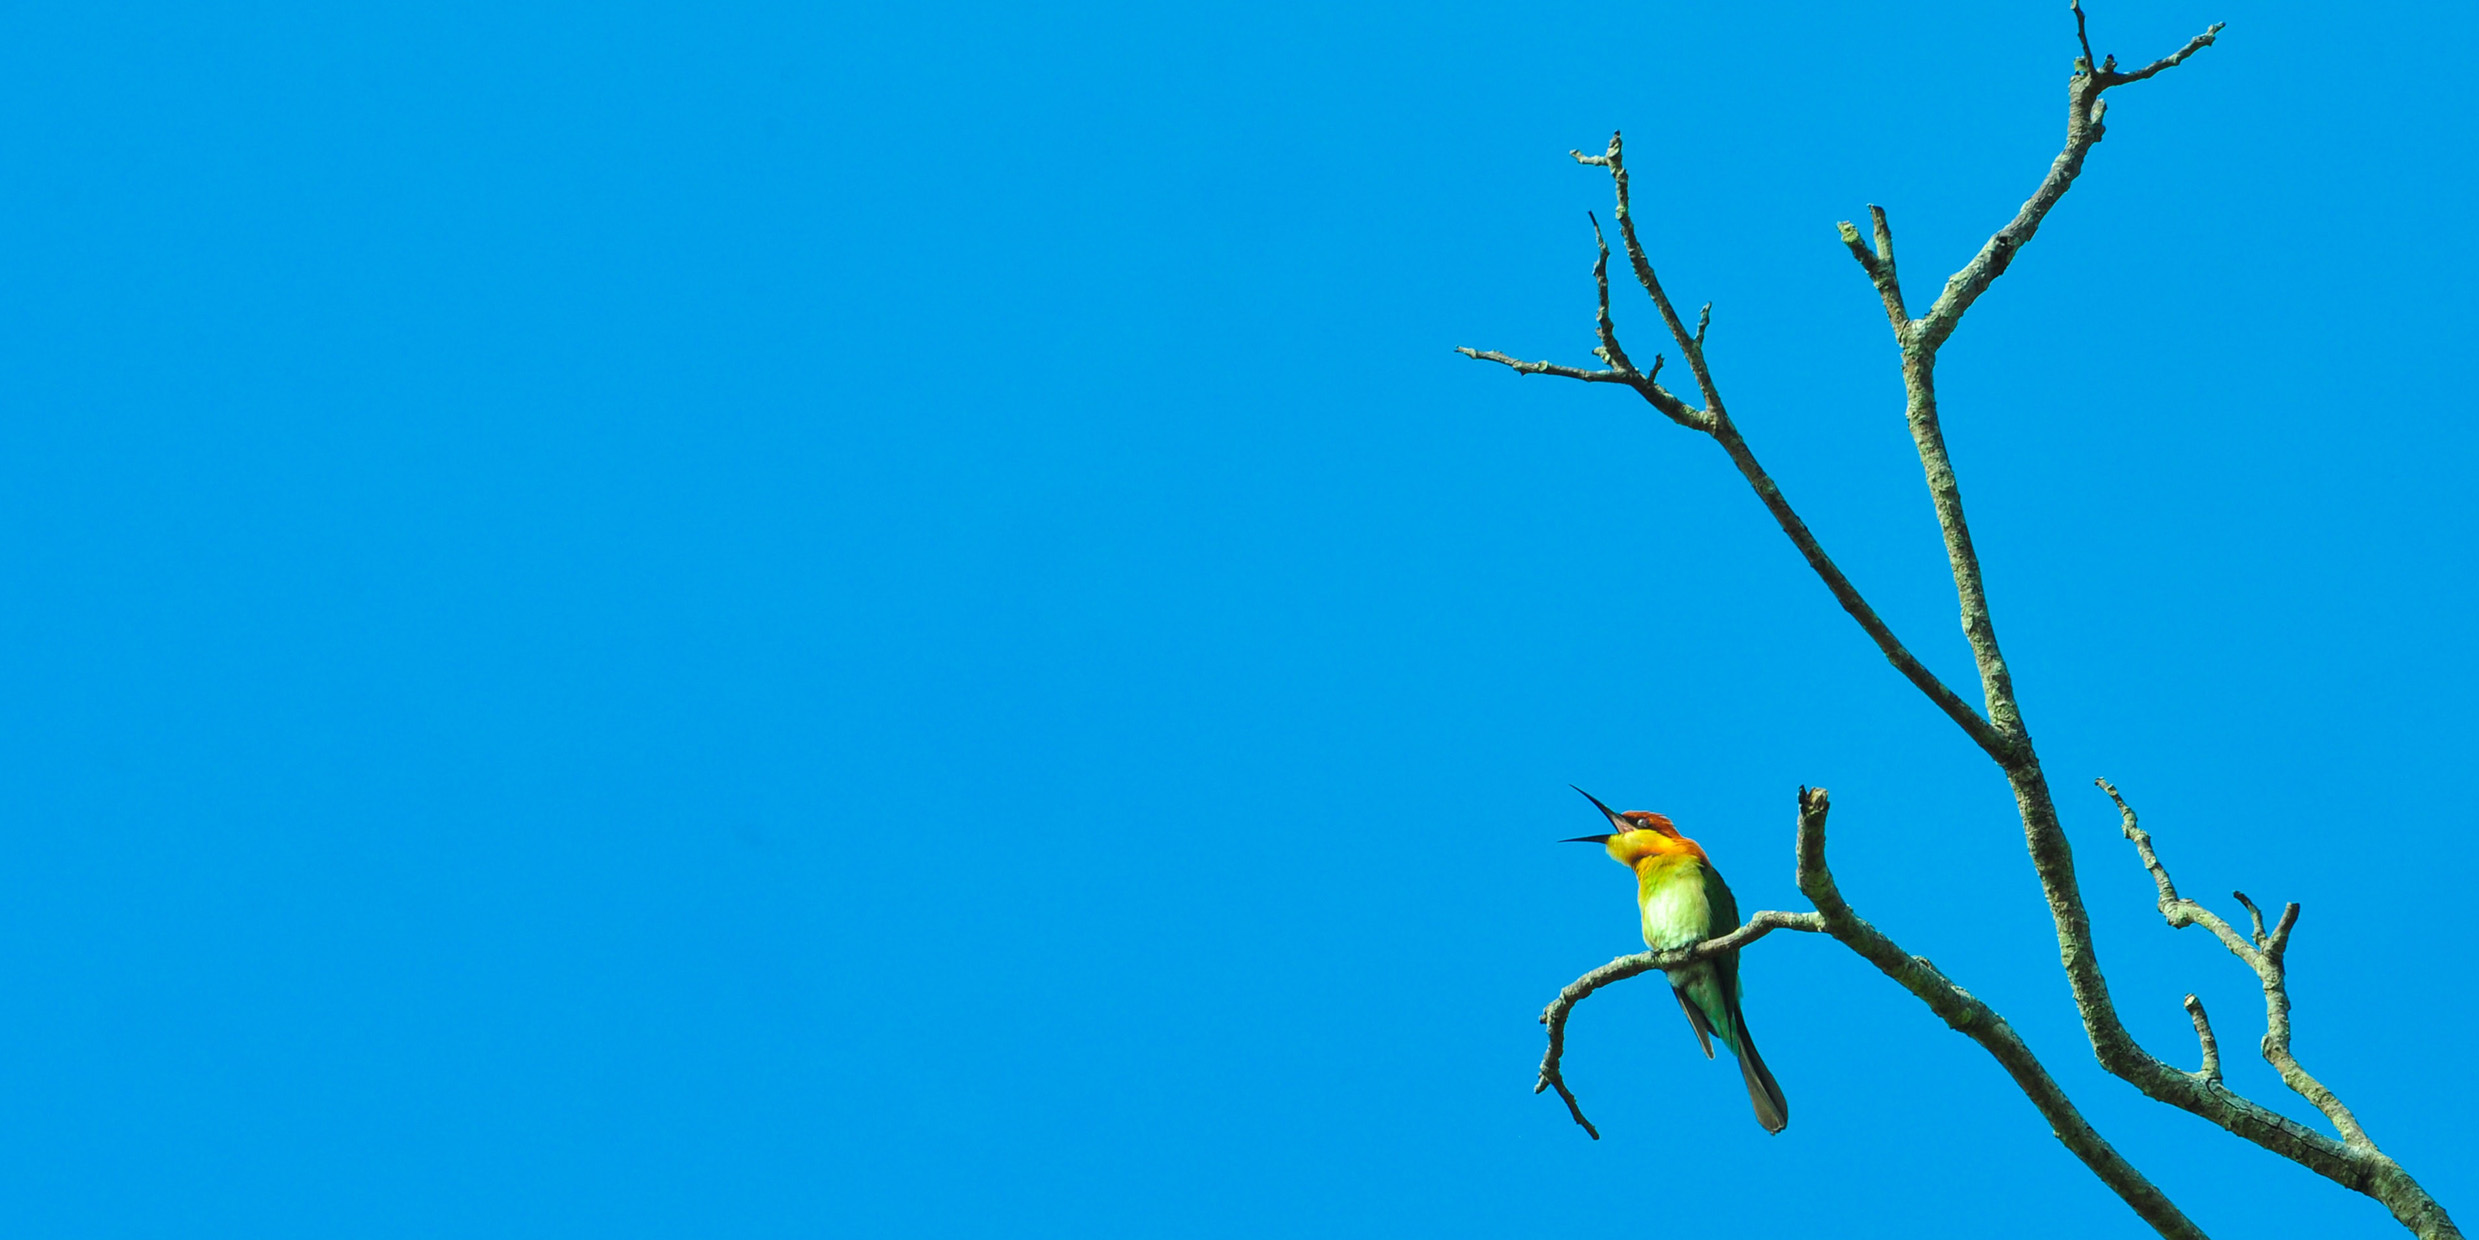 Image of perched bird singing in front of blue sky